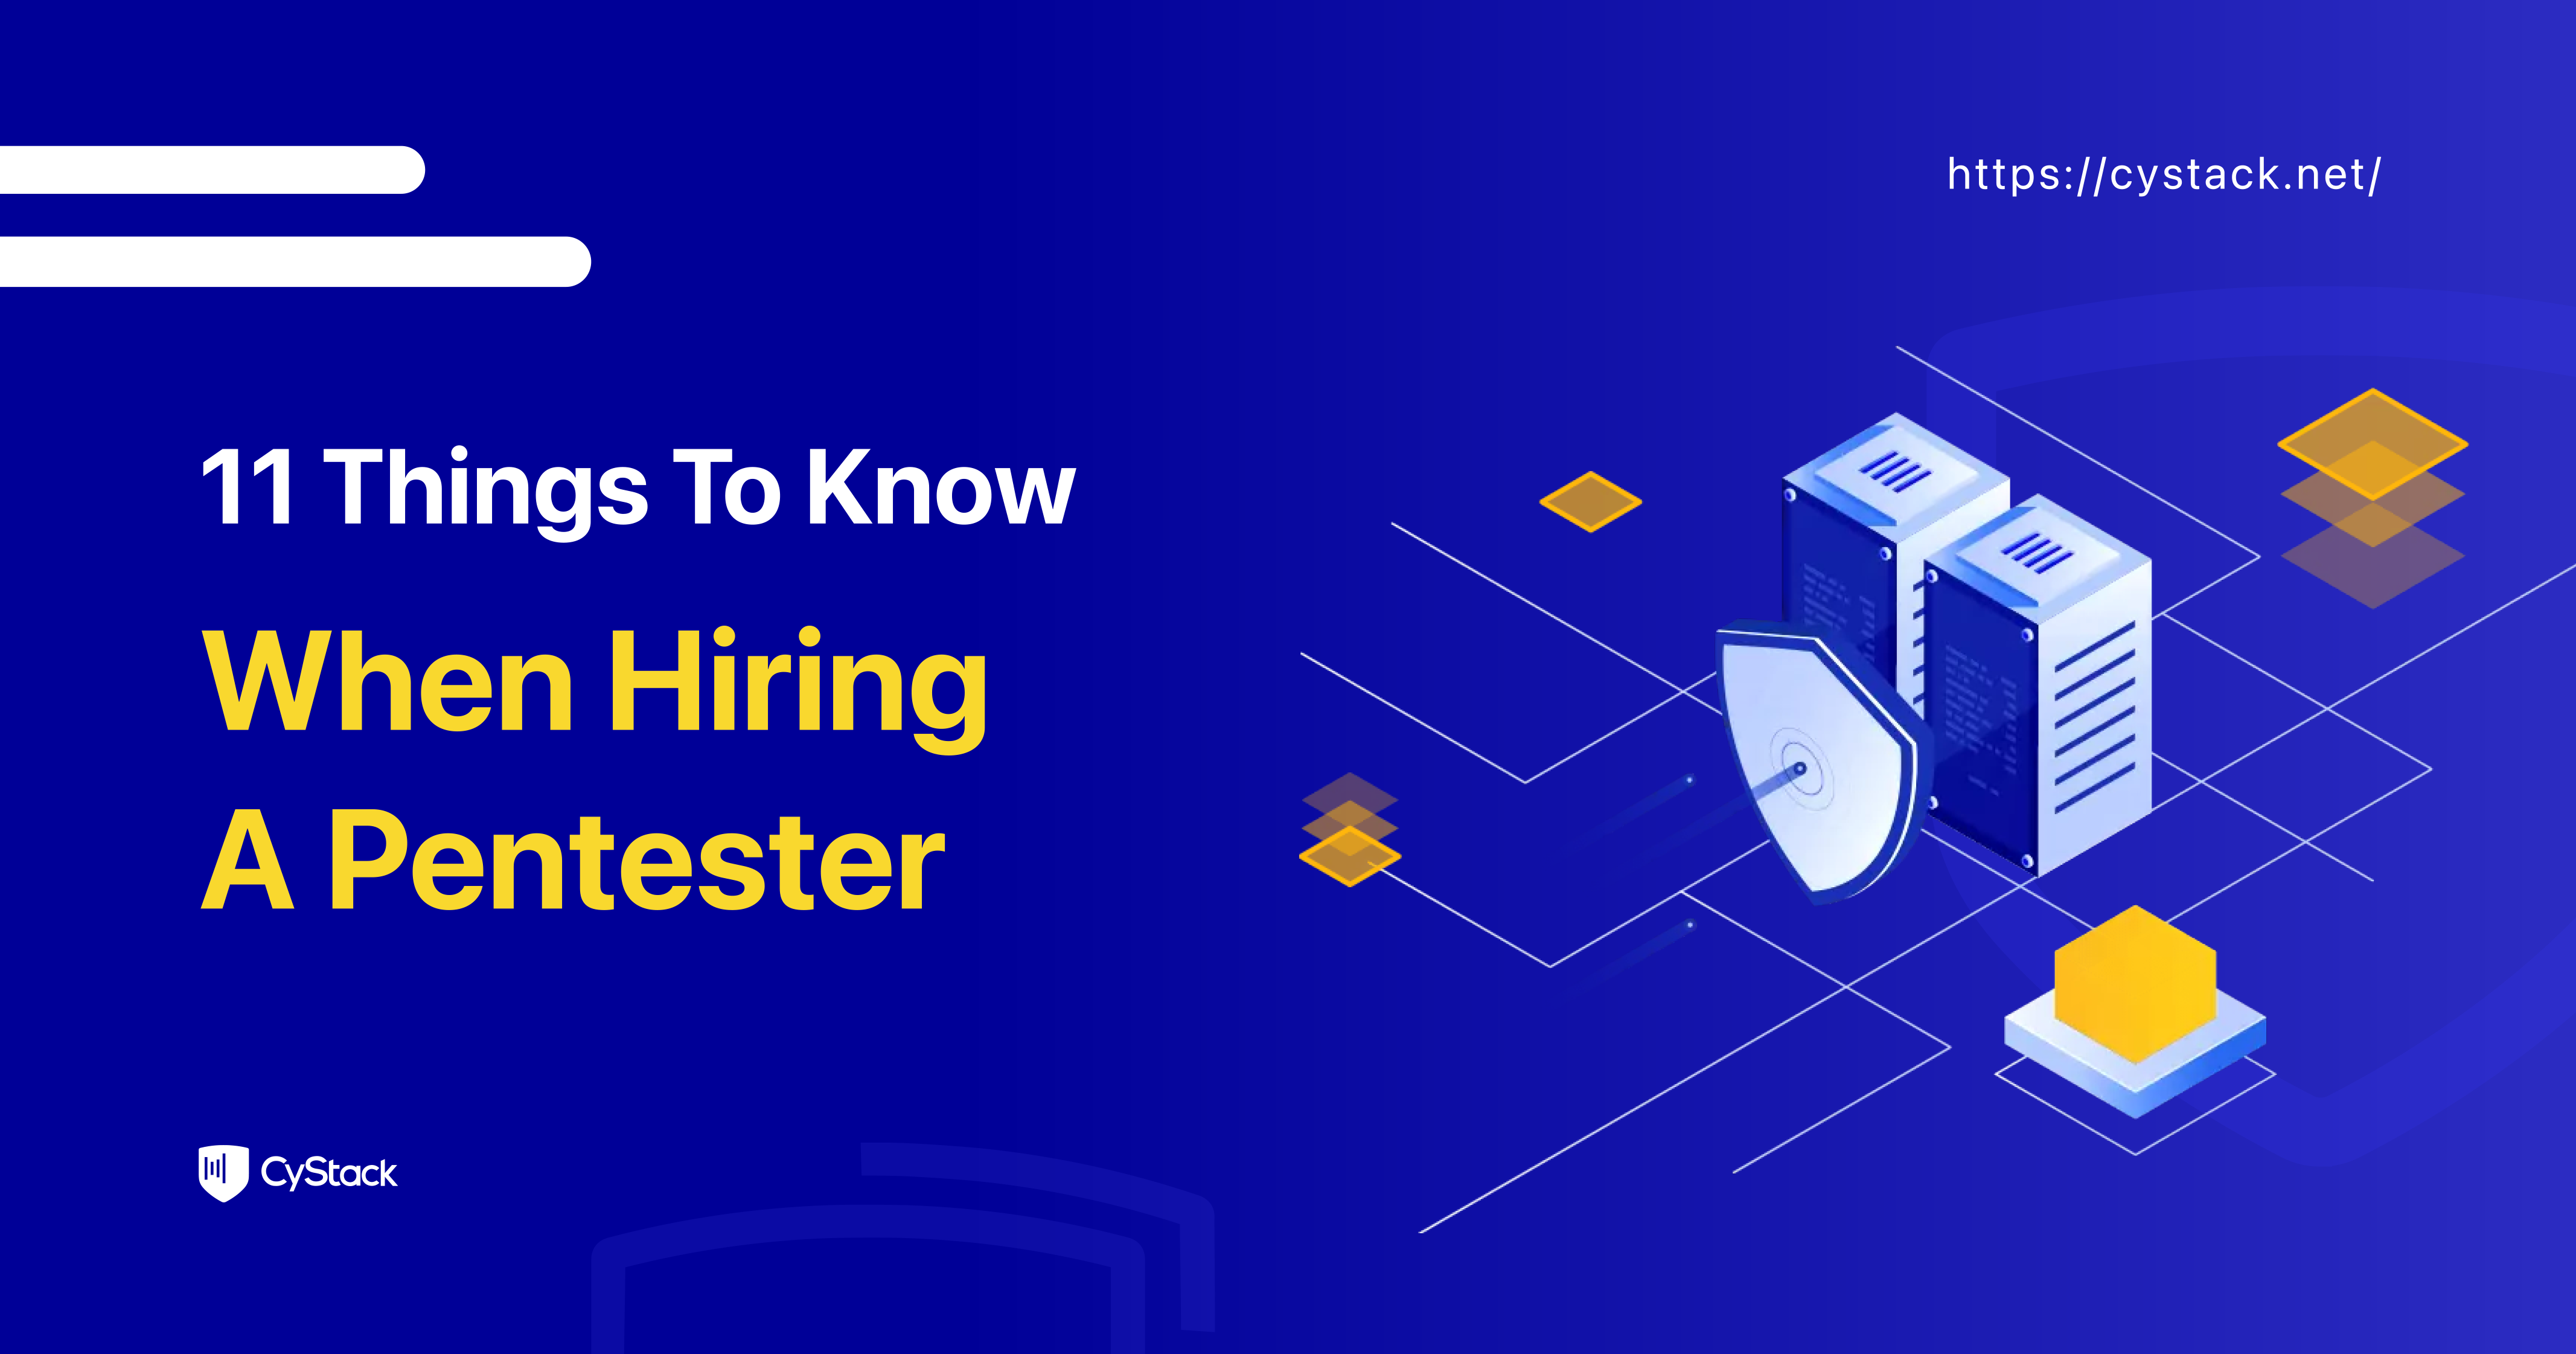 11 Things To Know When Hiring A Pentester